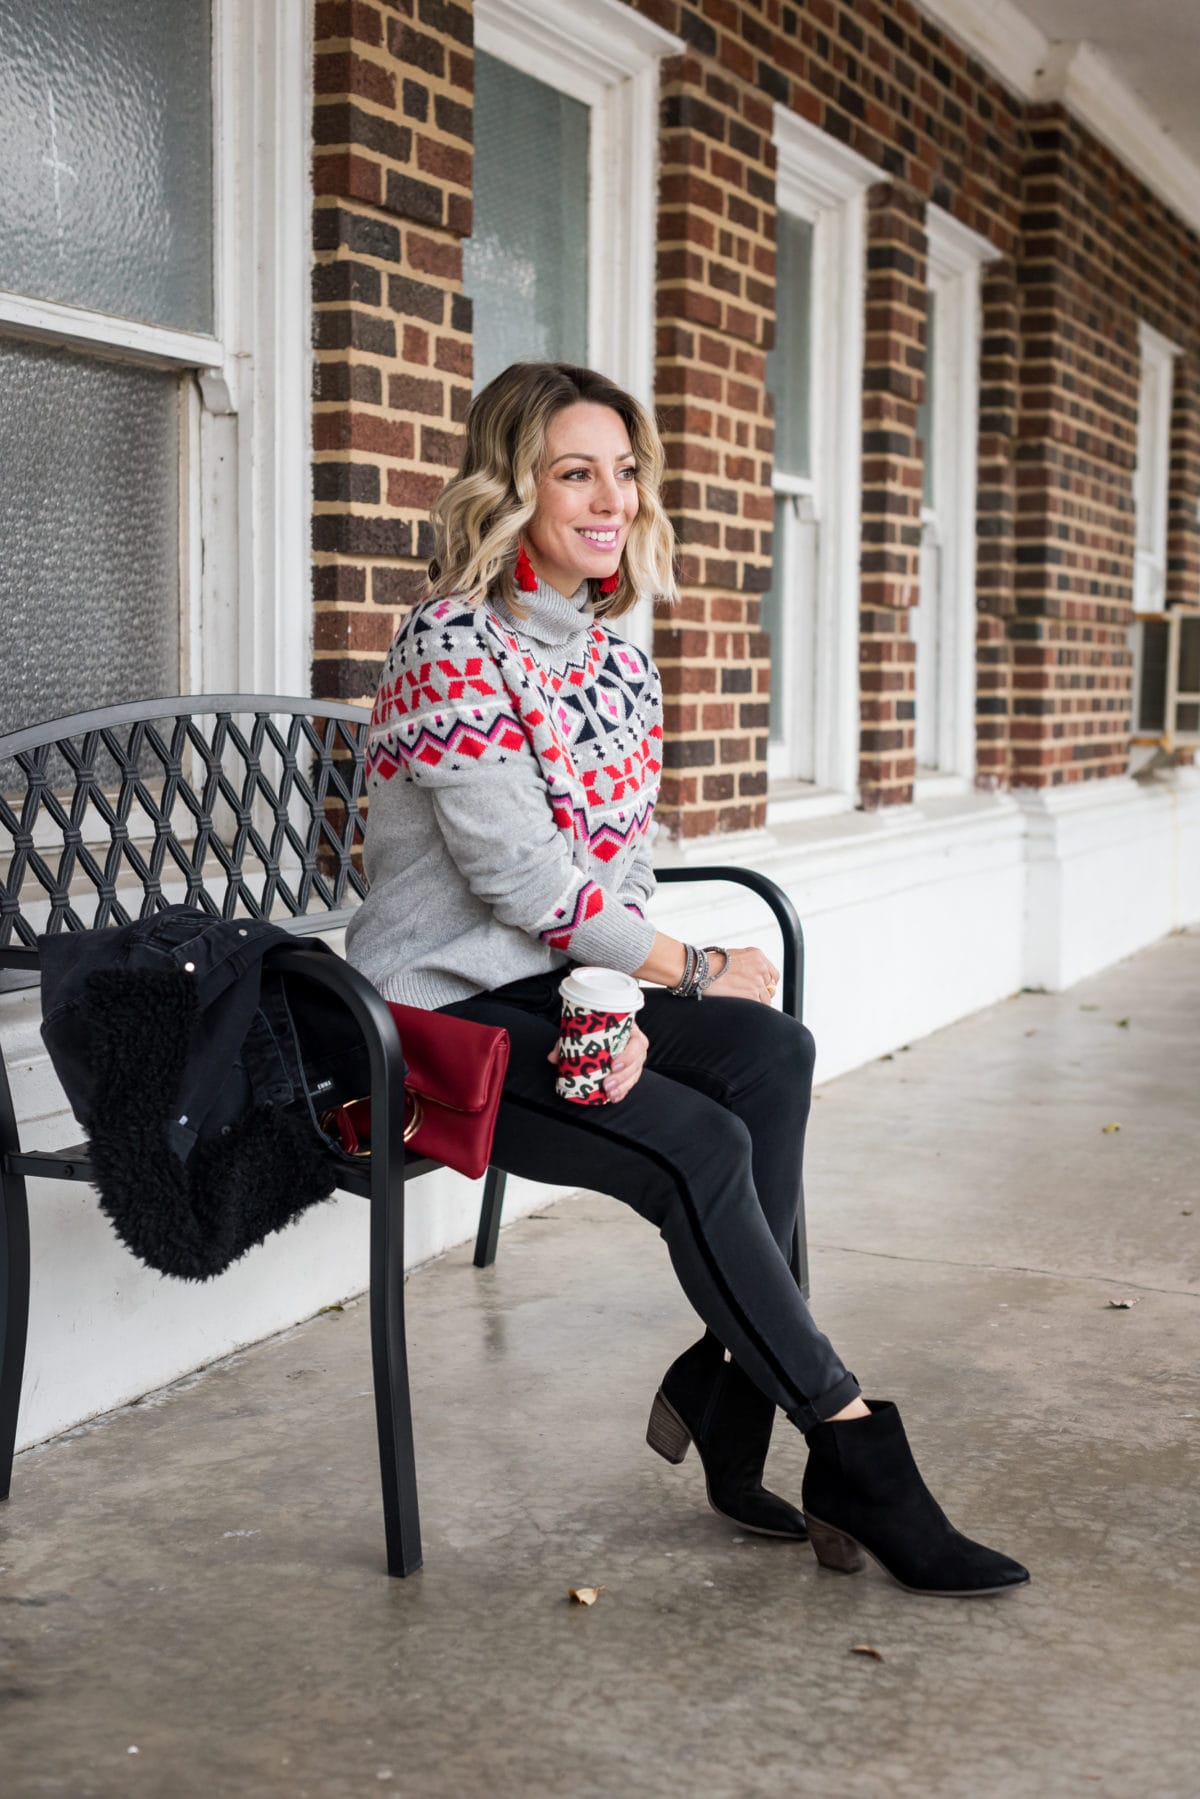 Winter outfit - fair isle sweater and jeans 